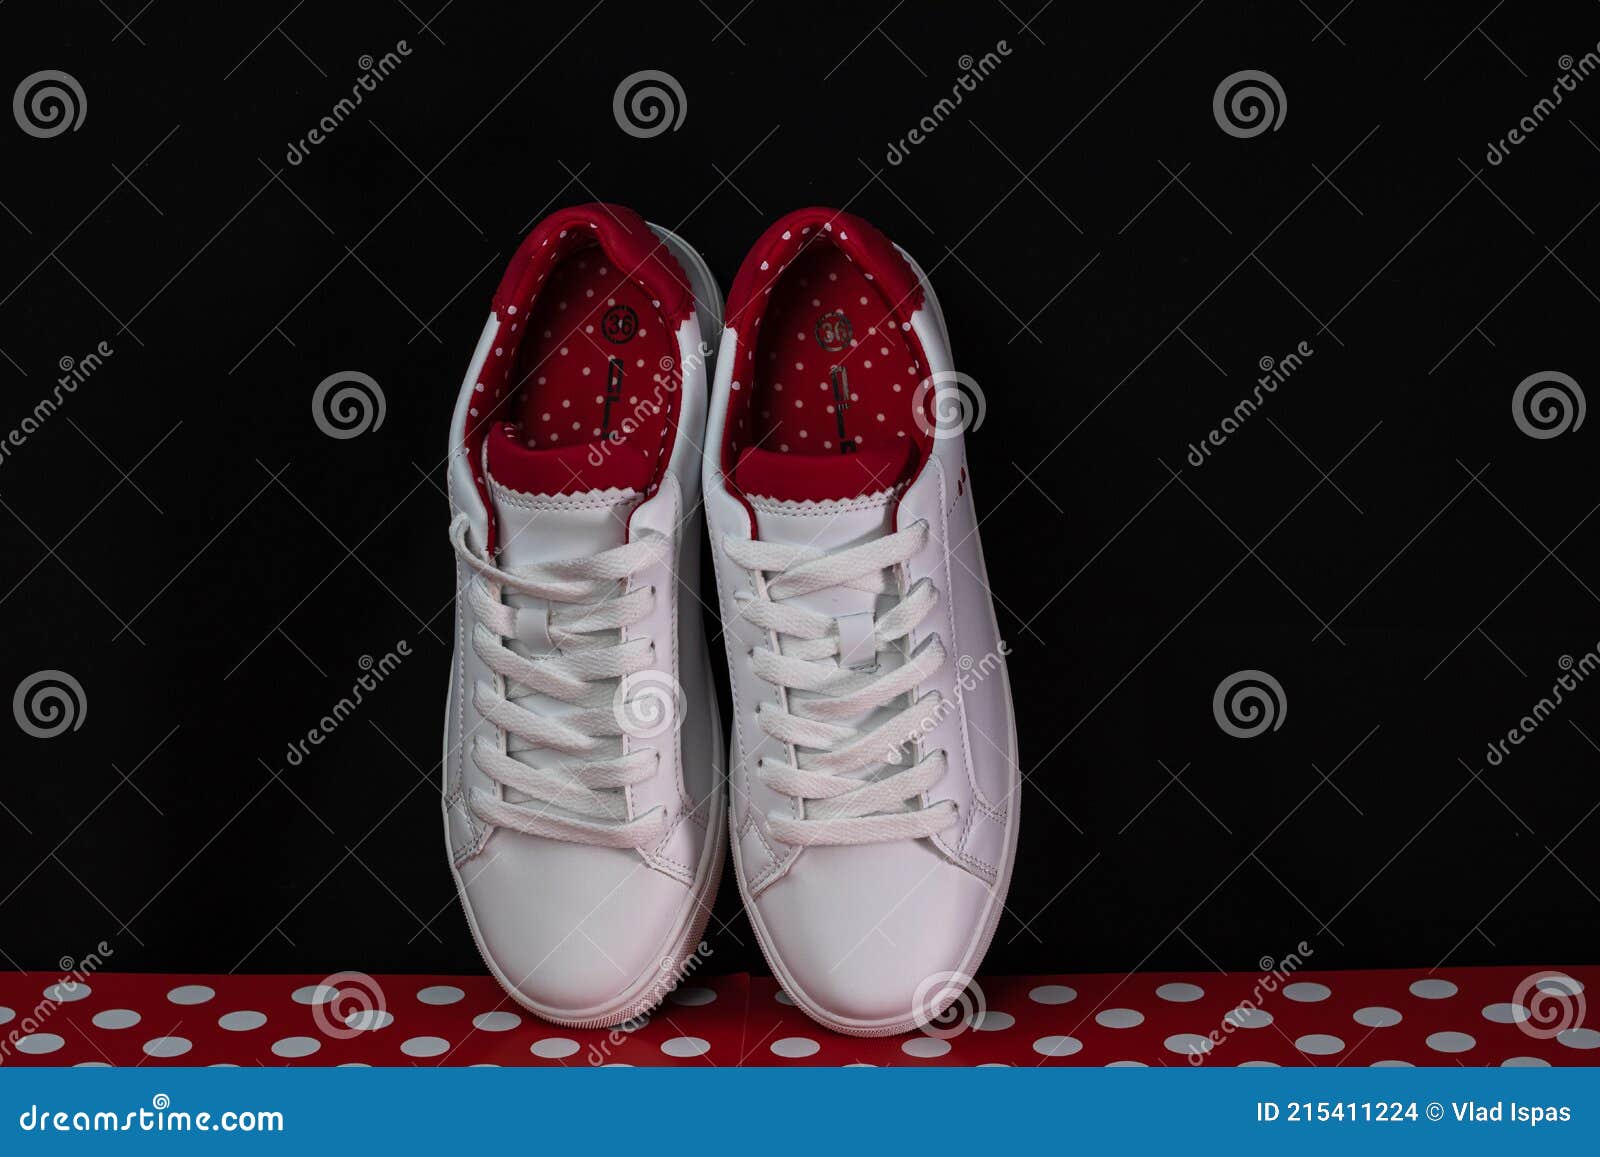 Partially relaxed Sidewalk Close Up on Details of Sport Shoes with White Dots in Bucharest, Romania,  2021 Stock Photo - Image of shoe, foot: 215411224